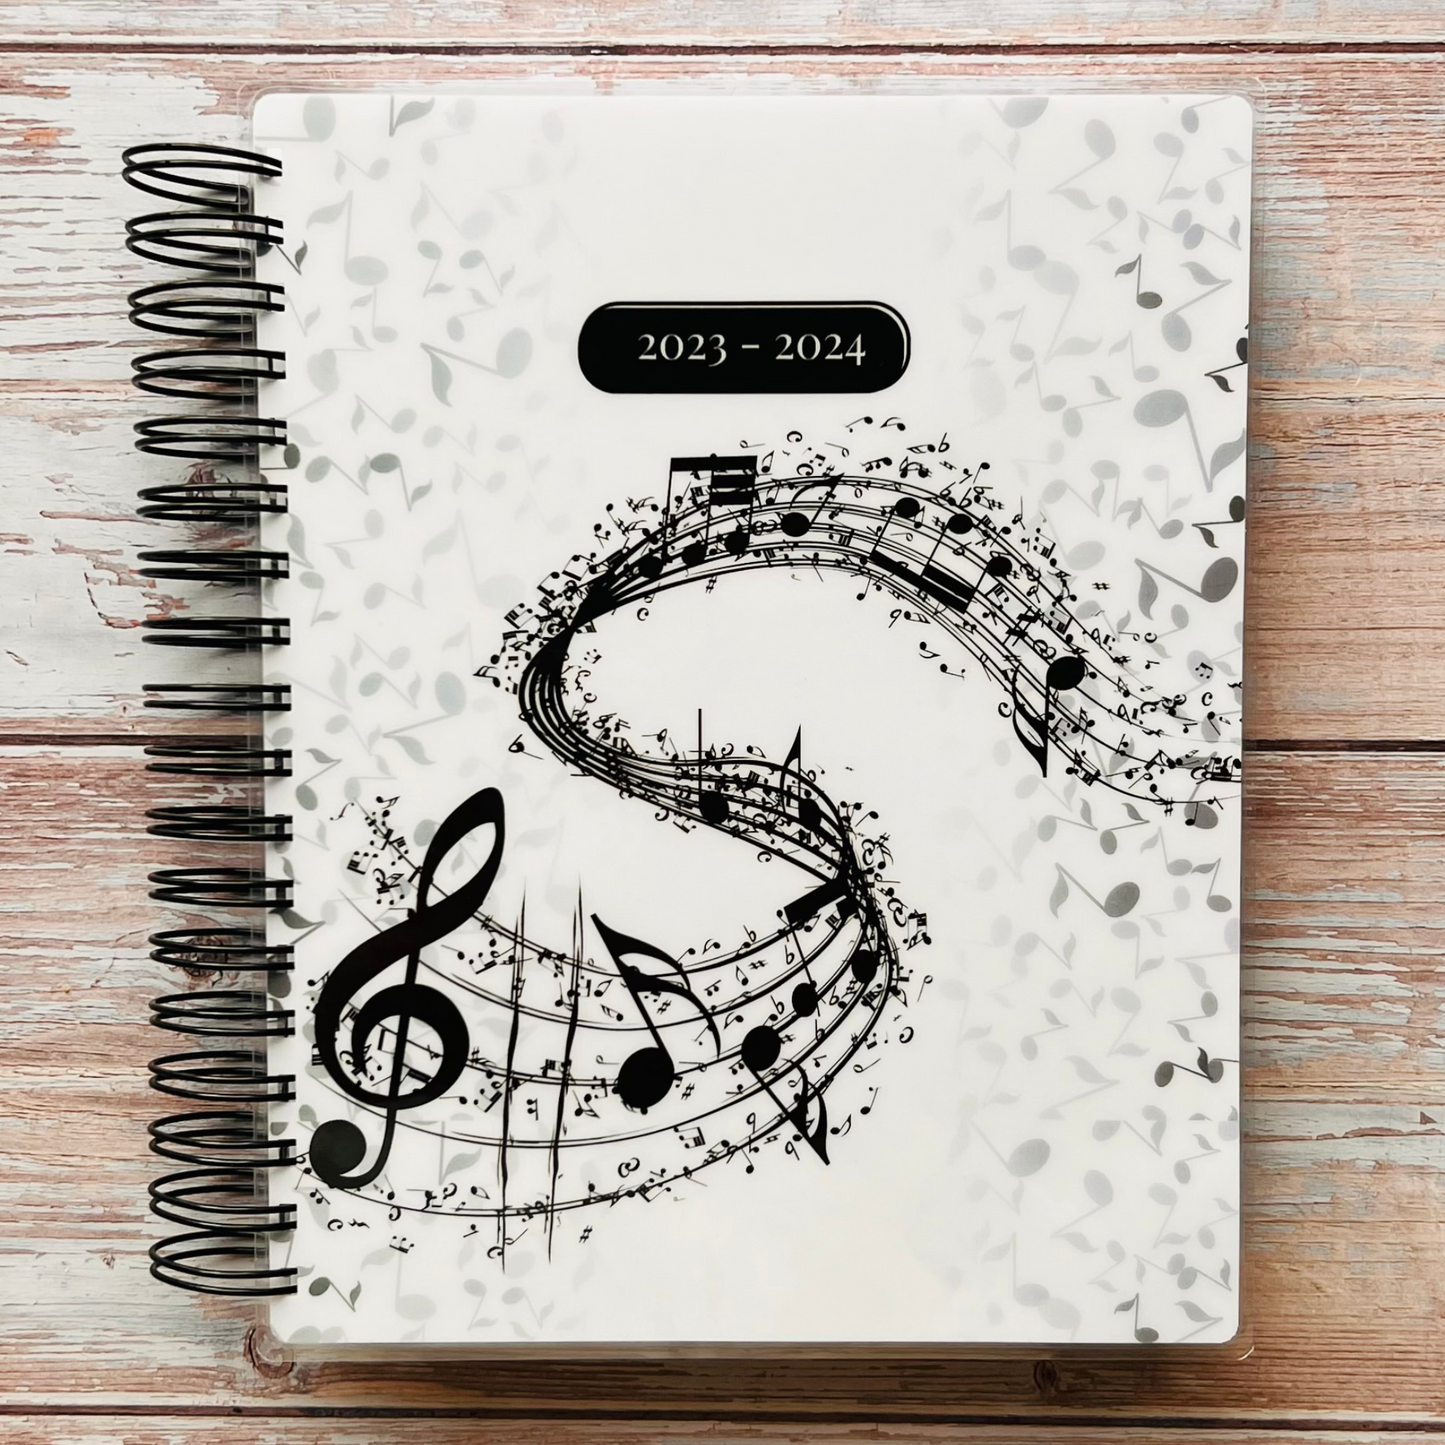 Personalized Weekly Planner 2023-2024 | Music Weekly Planners Artful Planner Co. July-2023 Unlined Vertical 